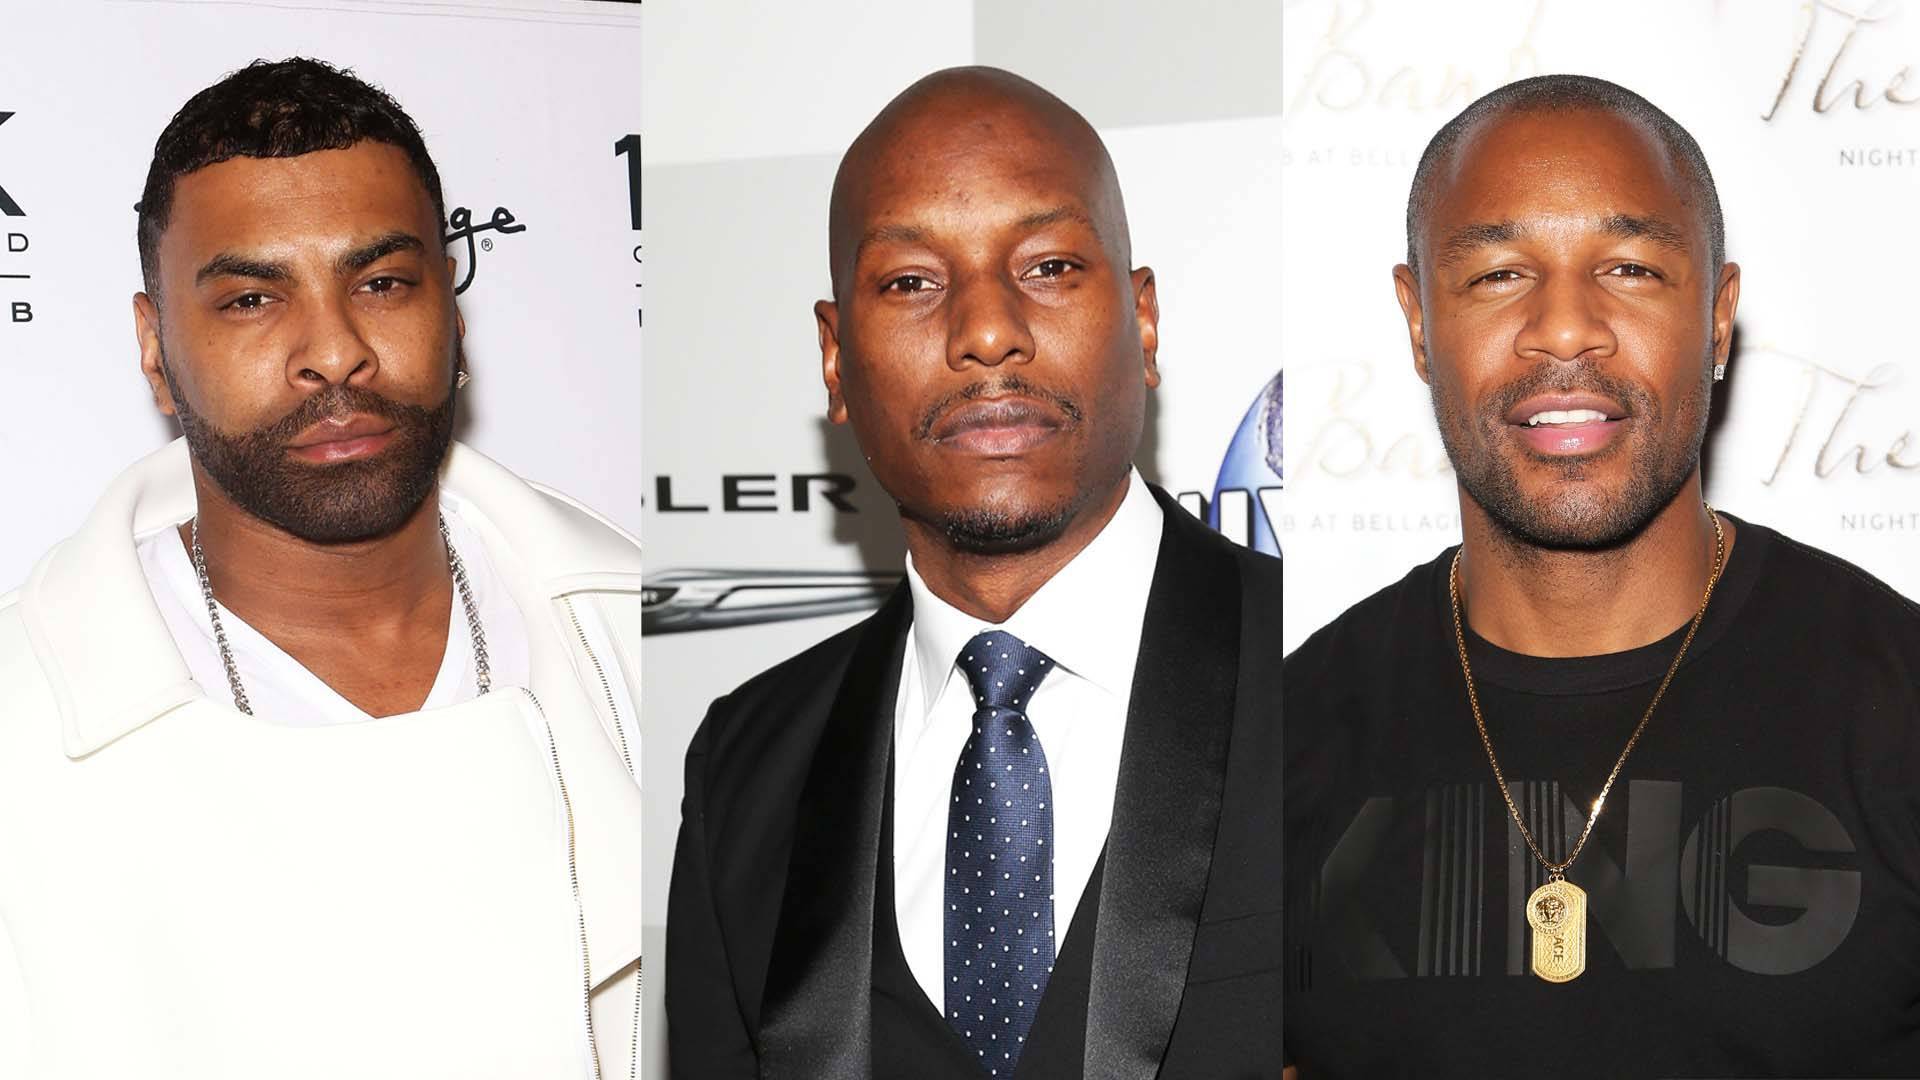 Tyrese, Ginuwine and Tank reuniting for TGT’s second group album